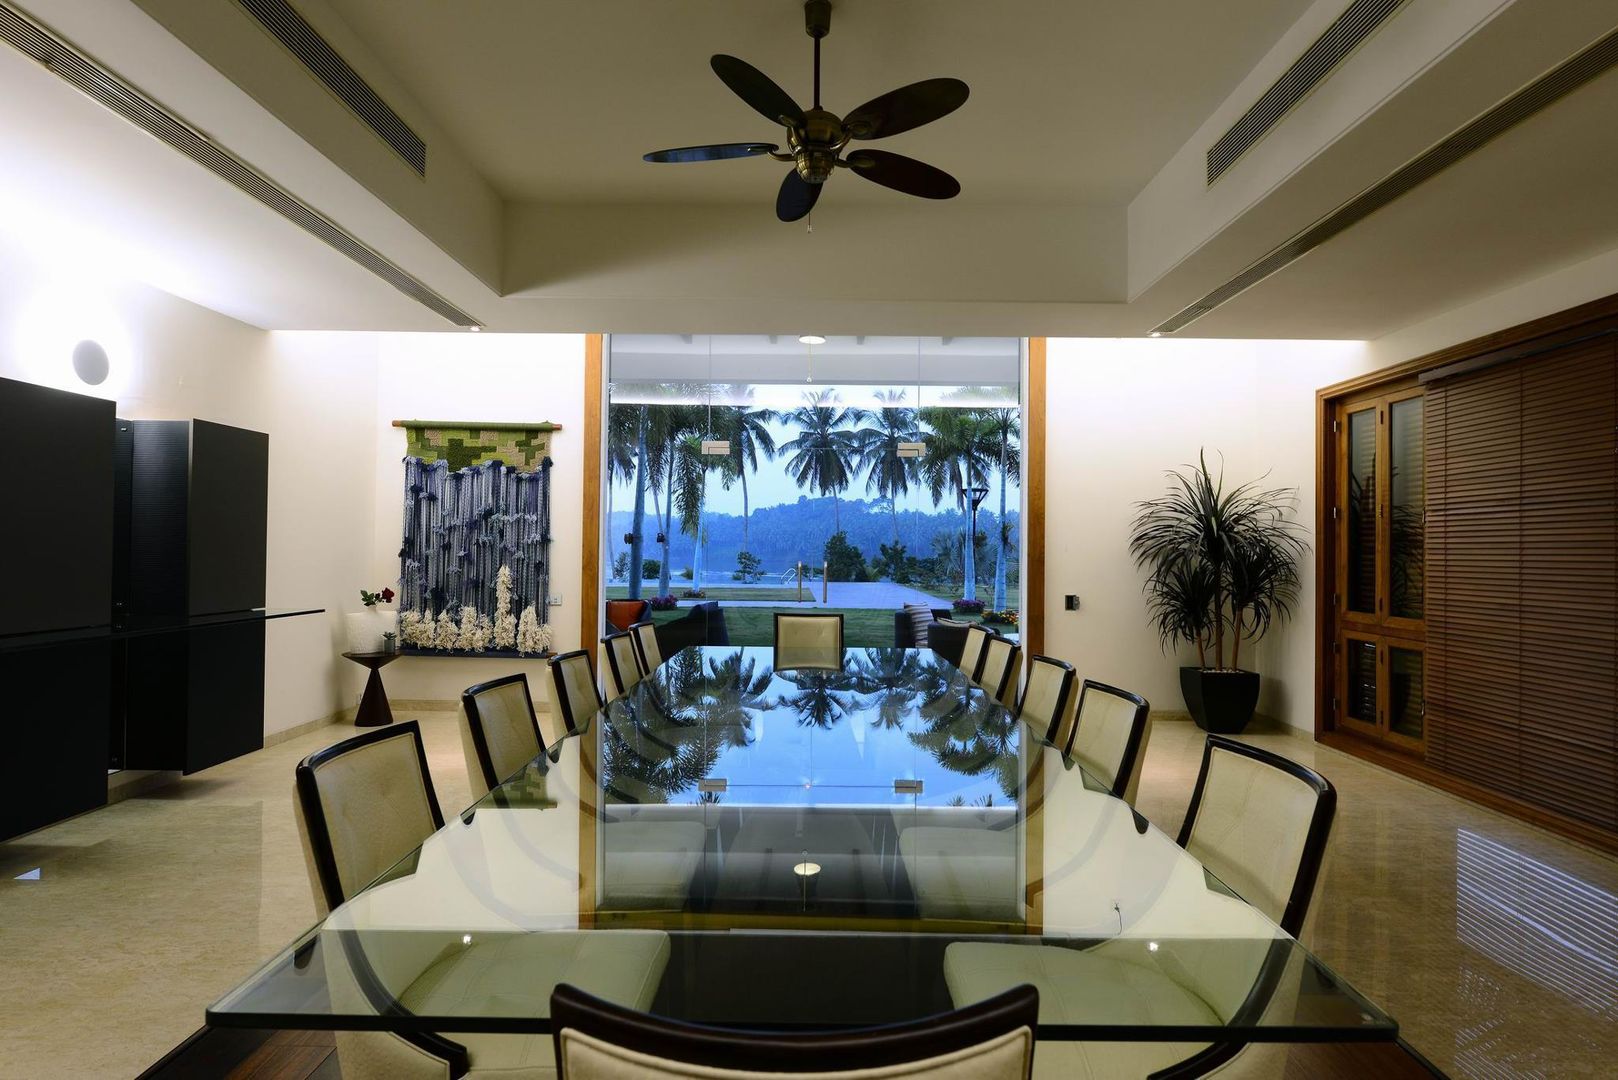 PRIVATE RESIDENCE AT KERALA(CALICUT)INDIA, TOPOS+PARTNERS TOPOS+PARTNERS Klassische Esszimmer